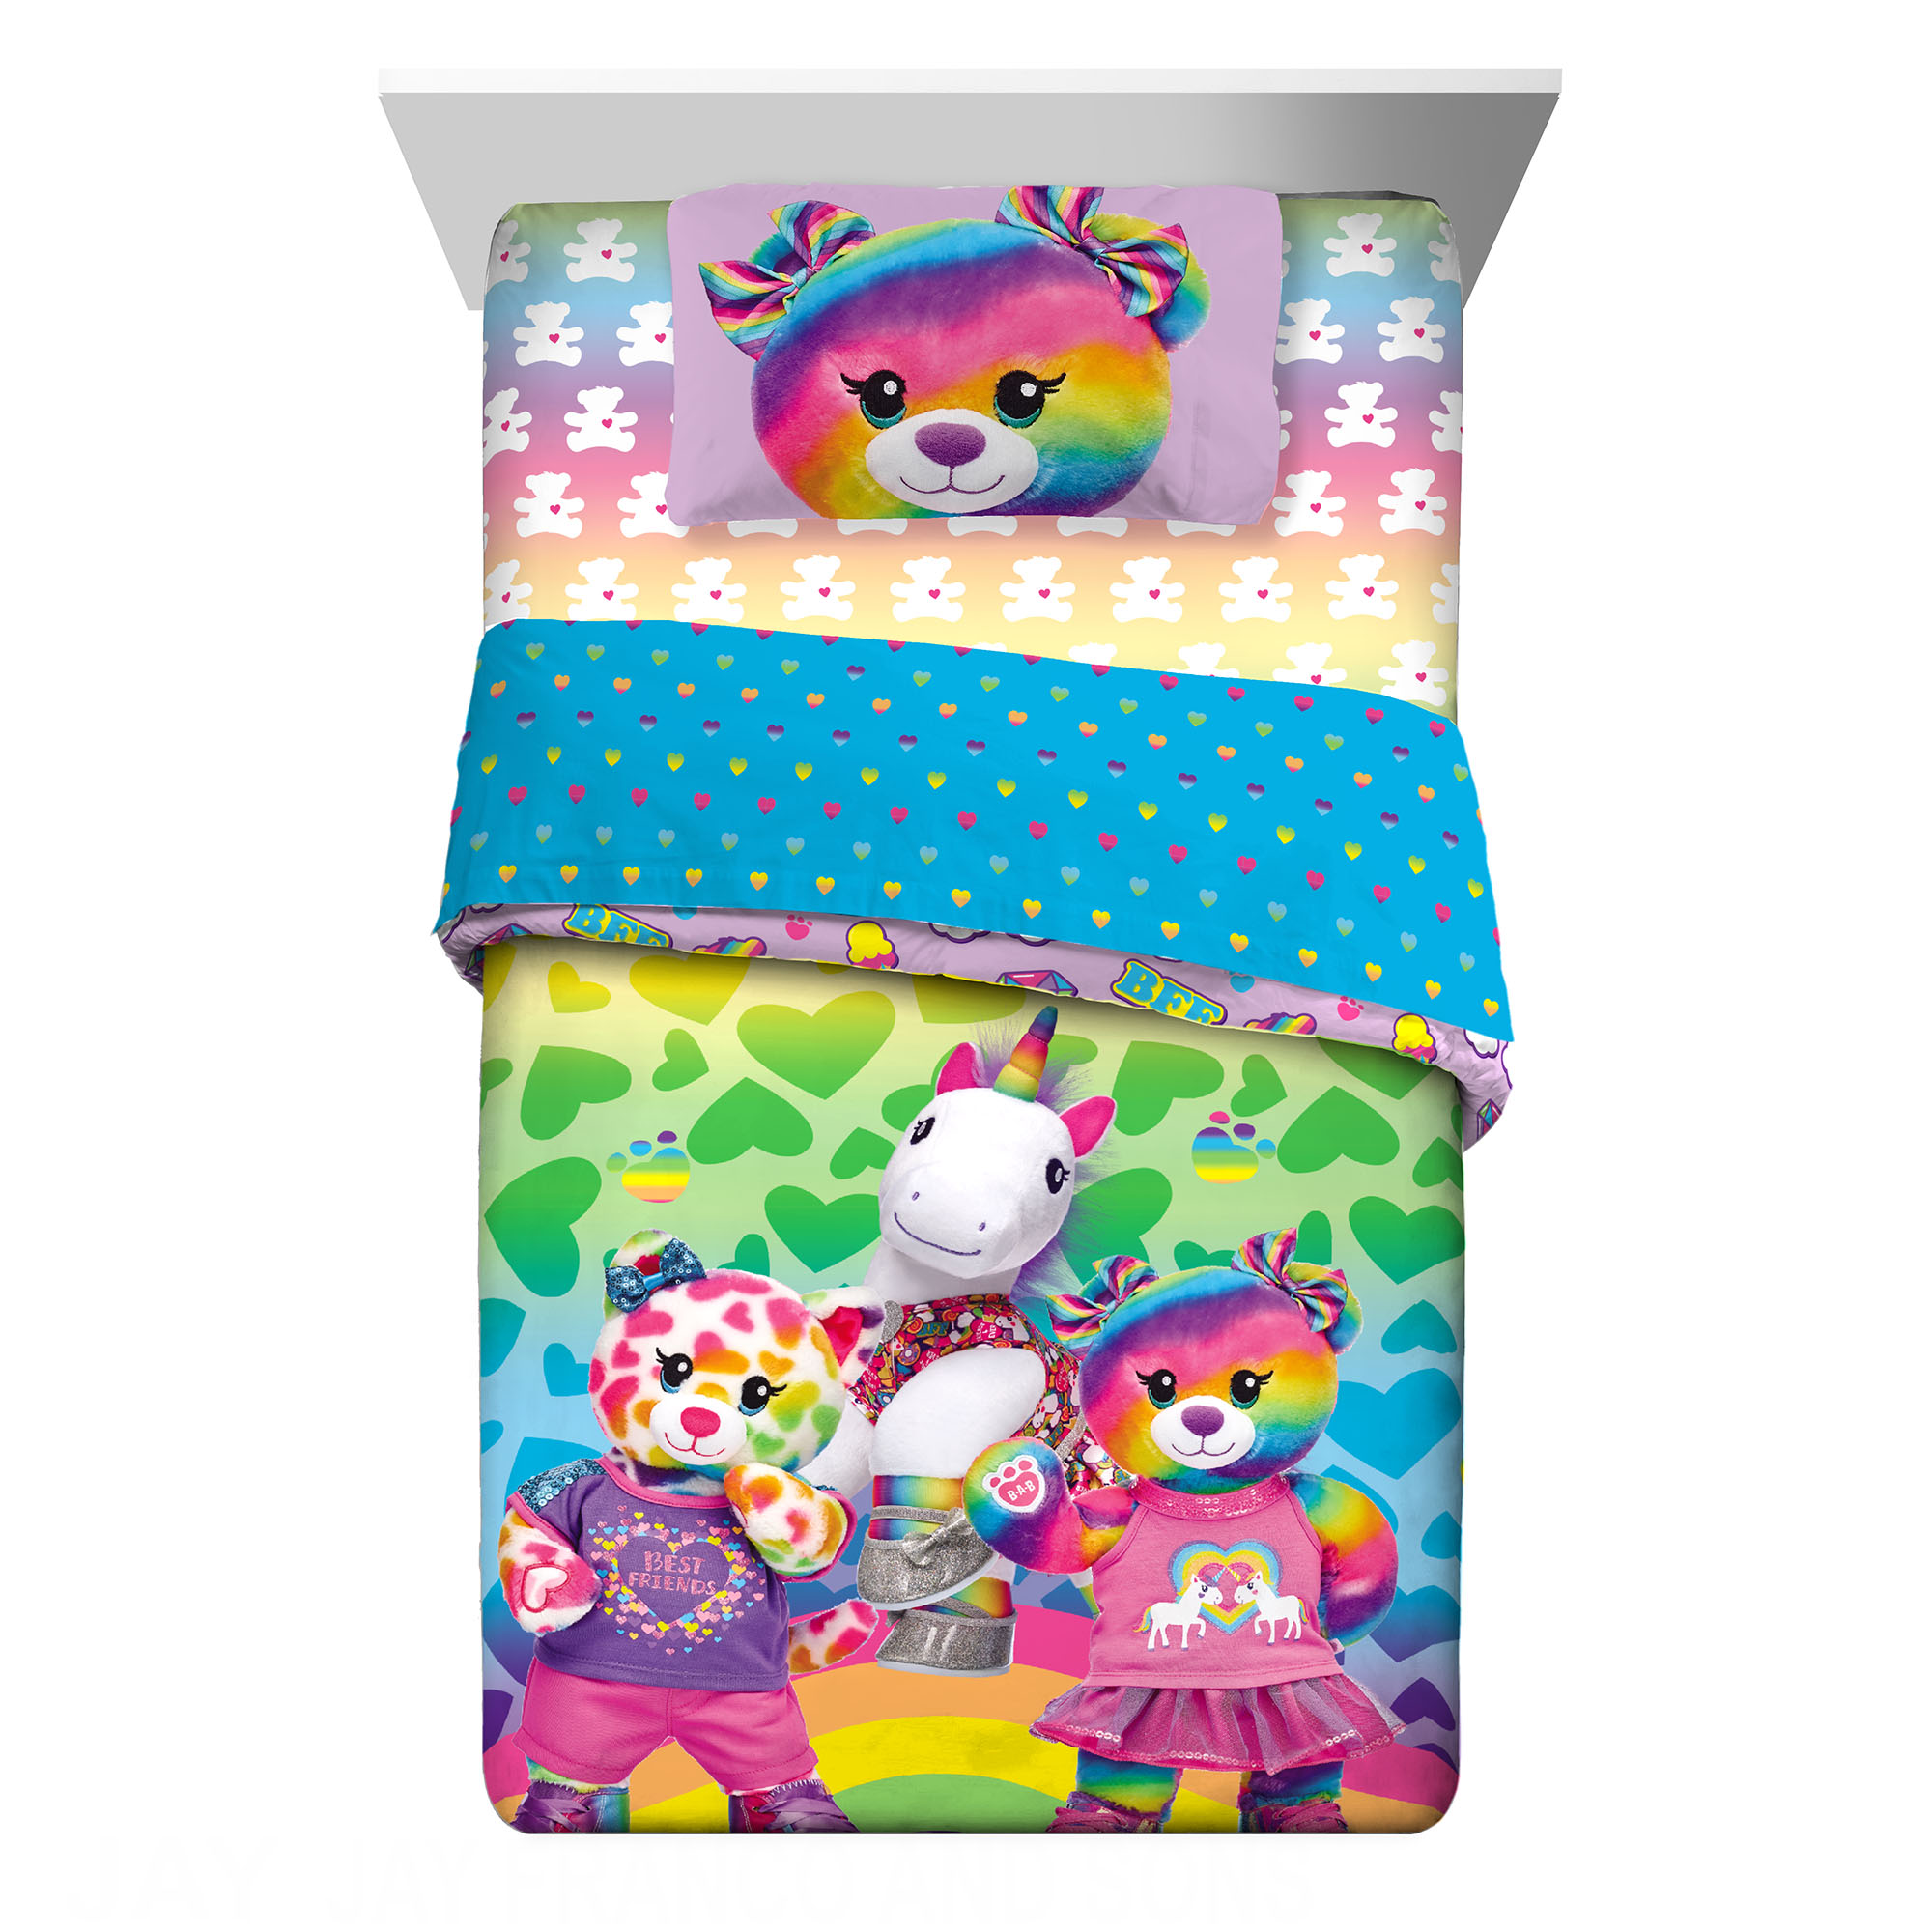 Build-A-Bear Workshop Kids Twin Bed in a Bag, Comforter and Sheets, Multicolor - image 1 of 10